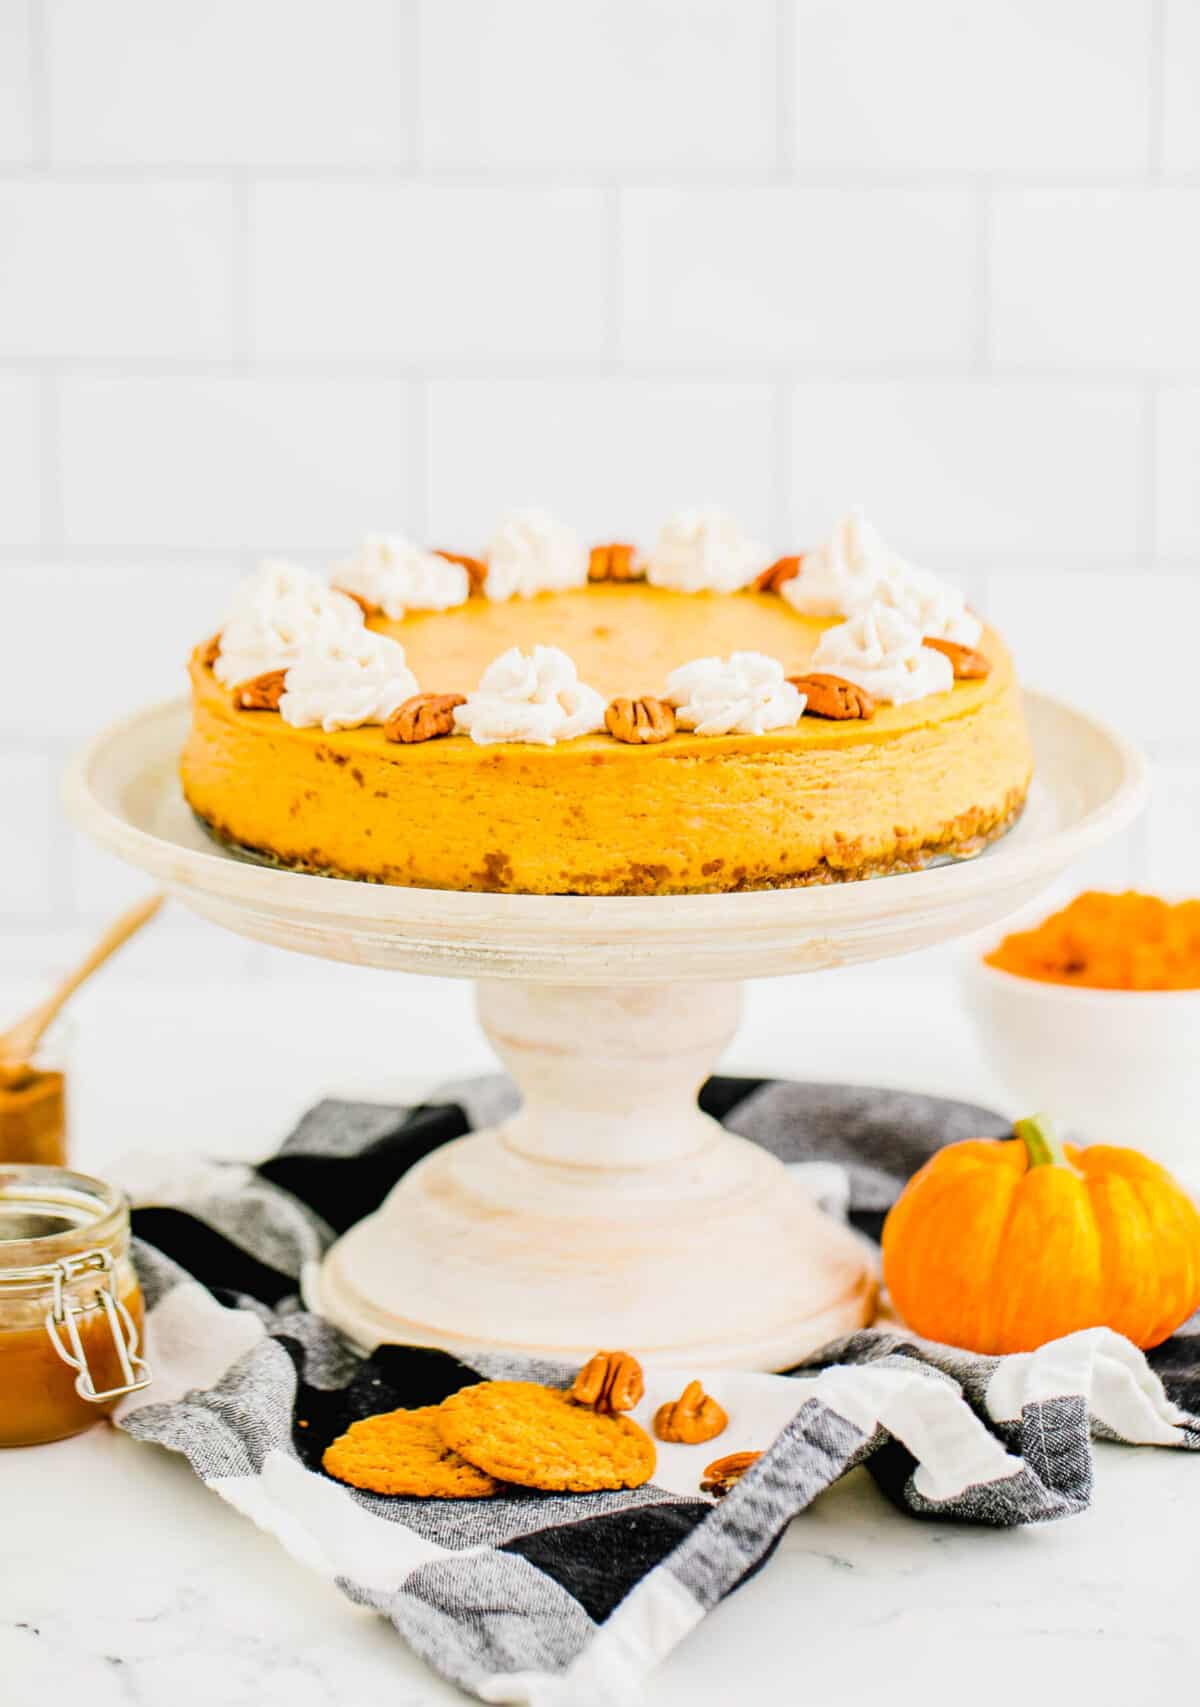 A pumpkin cheesecake on a cake stand, topped with pecans and whipped cream, surrounded by mini pumpkins